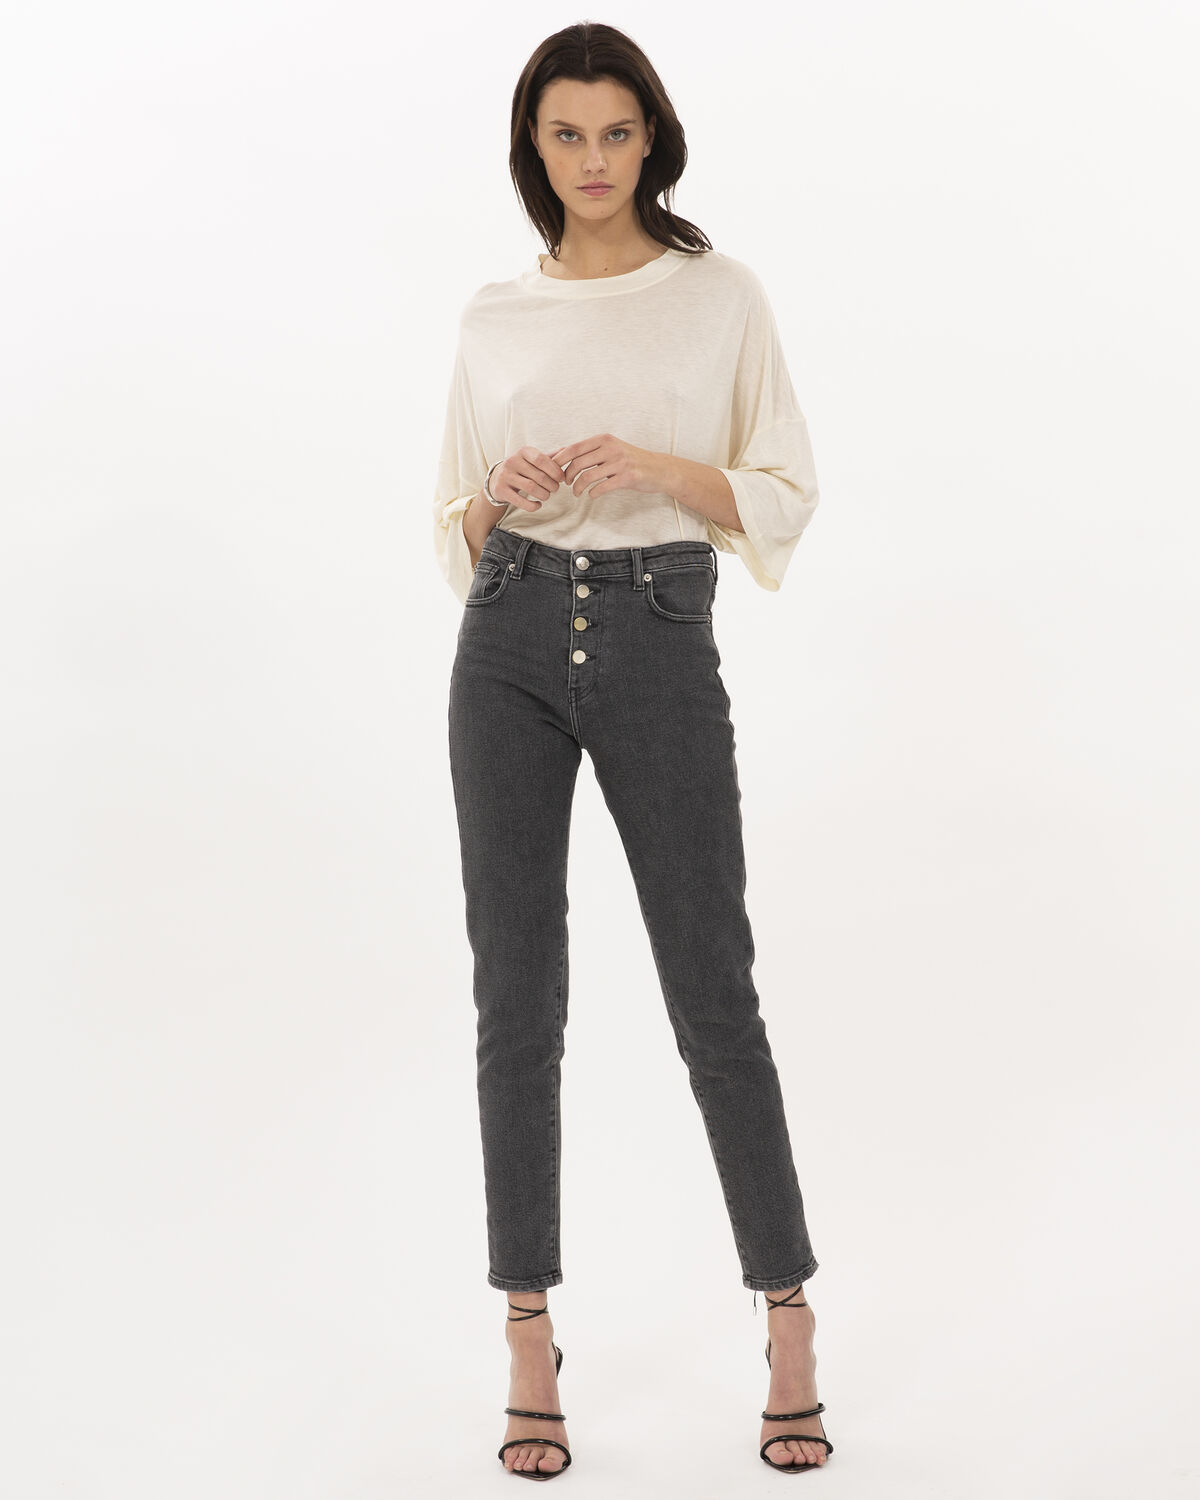 Famy Jeans Black And Grey by IRO Paris | Coshio Online Shop